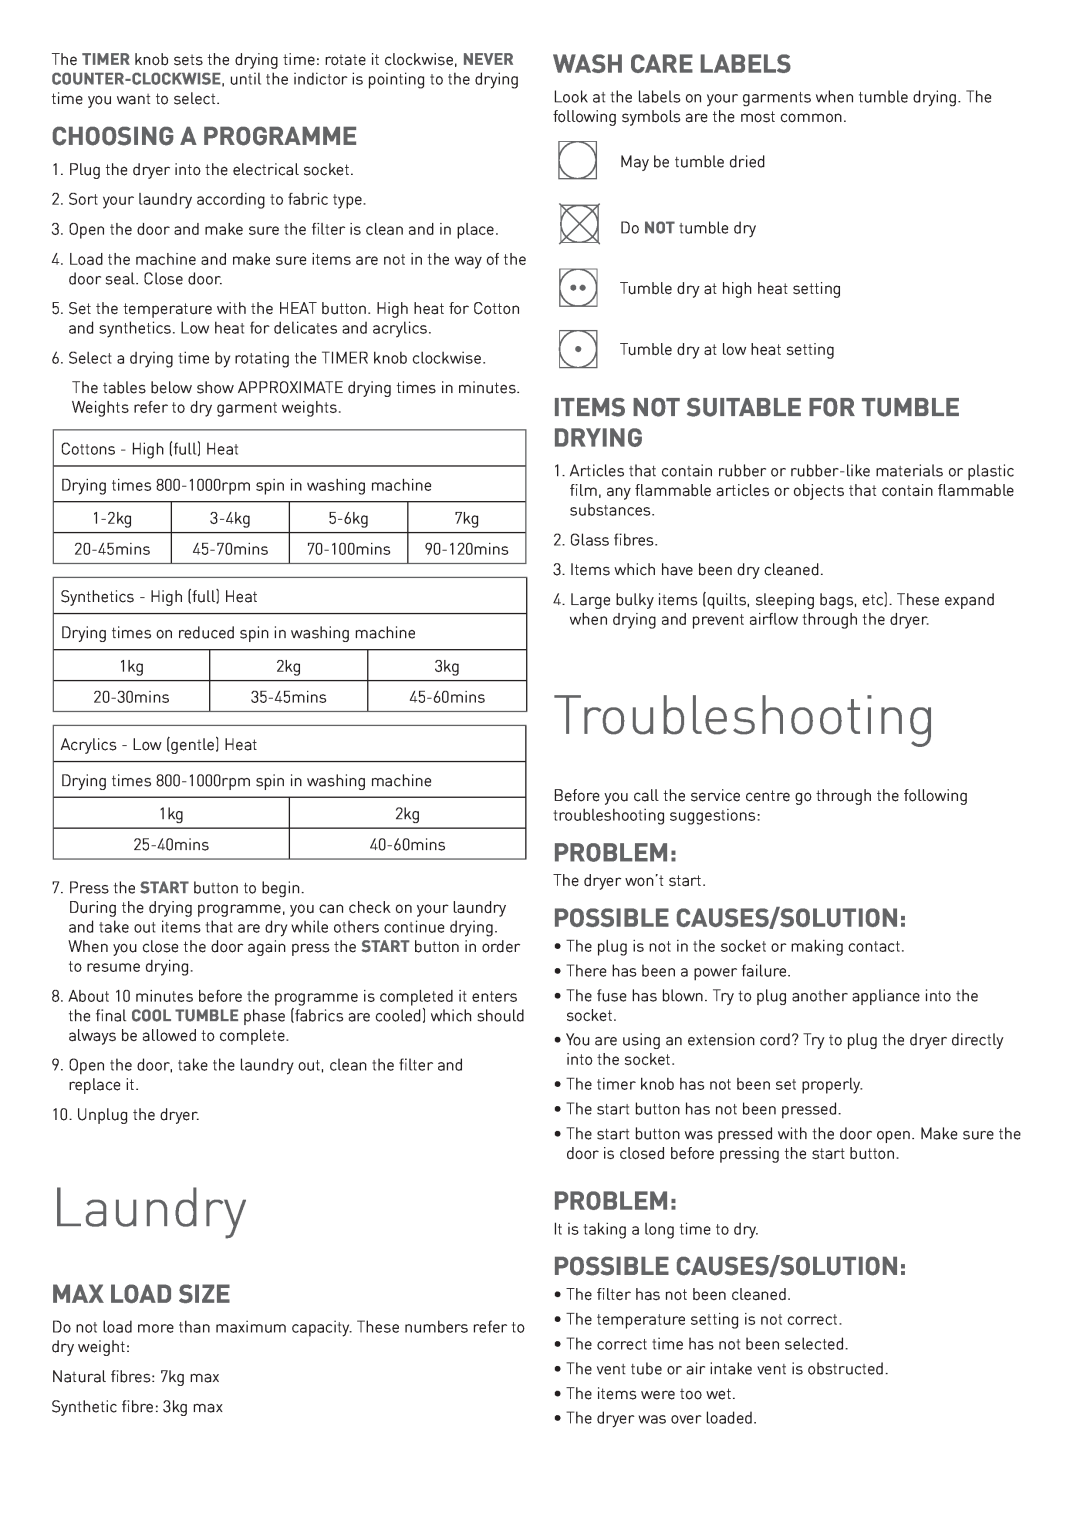 Hotpoint TVEM 70, TVYM 650 manual Laundry, Troubleshooting, Choosing A Programme, Max Load Size, Wash Care Labels, Problem 